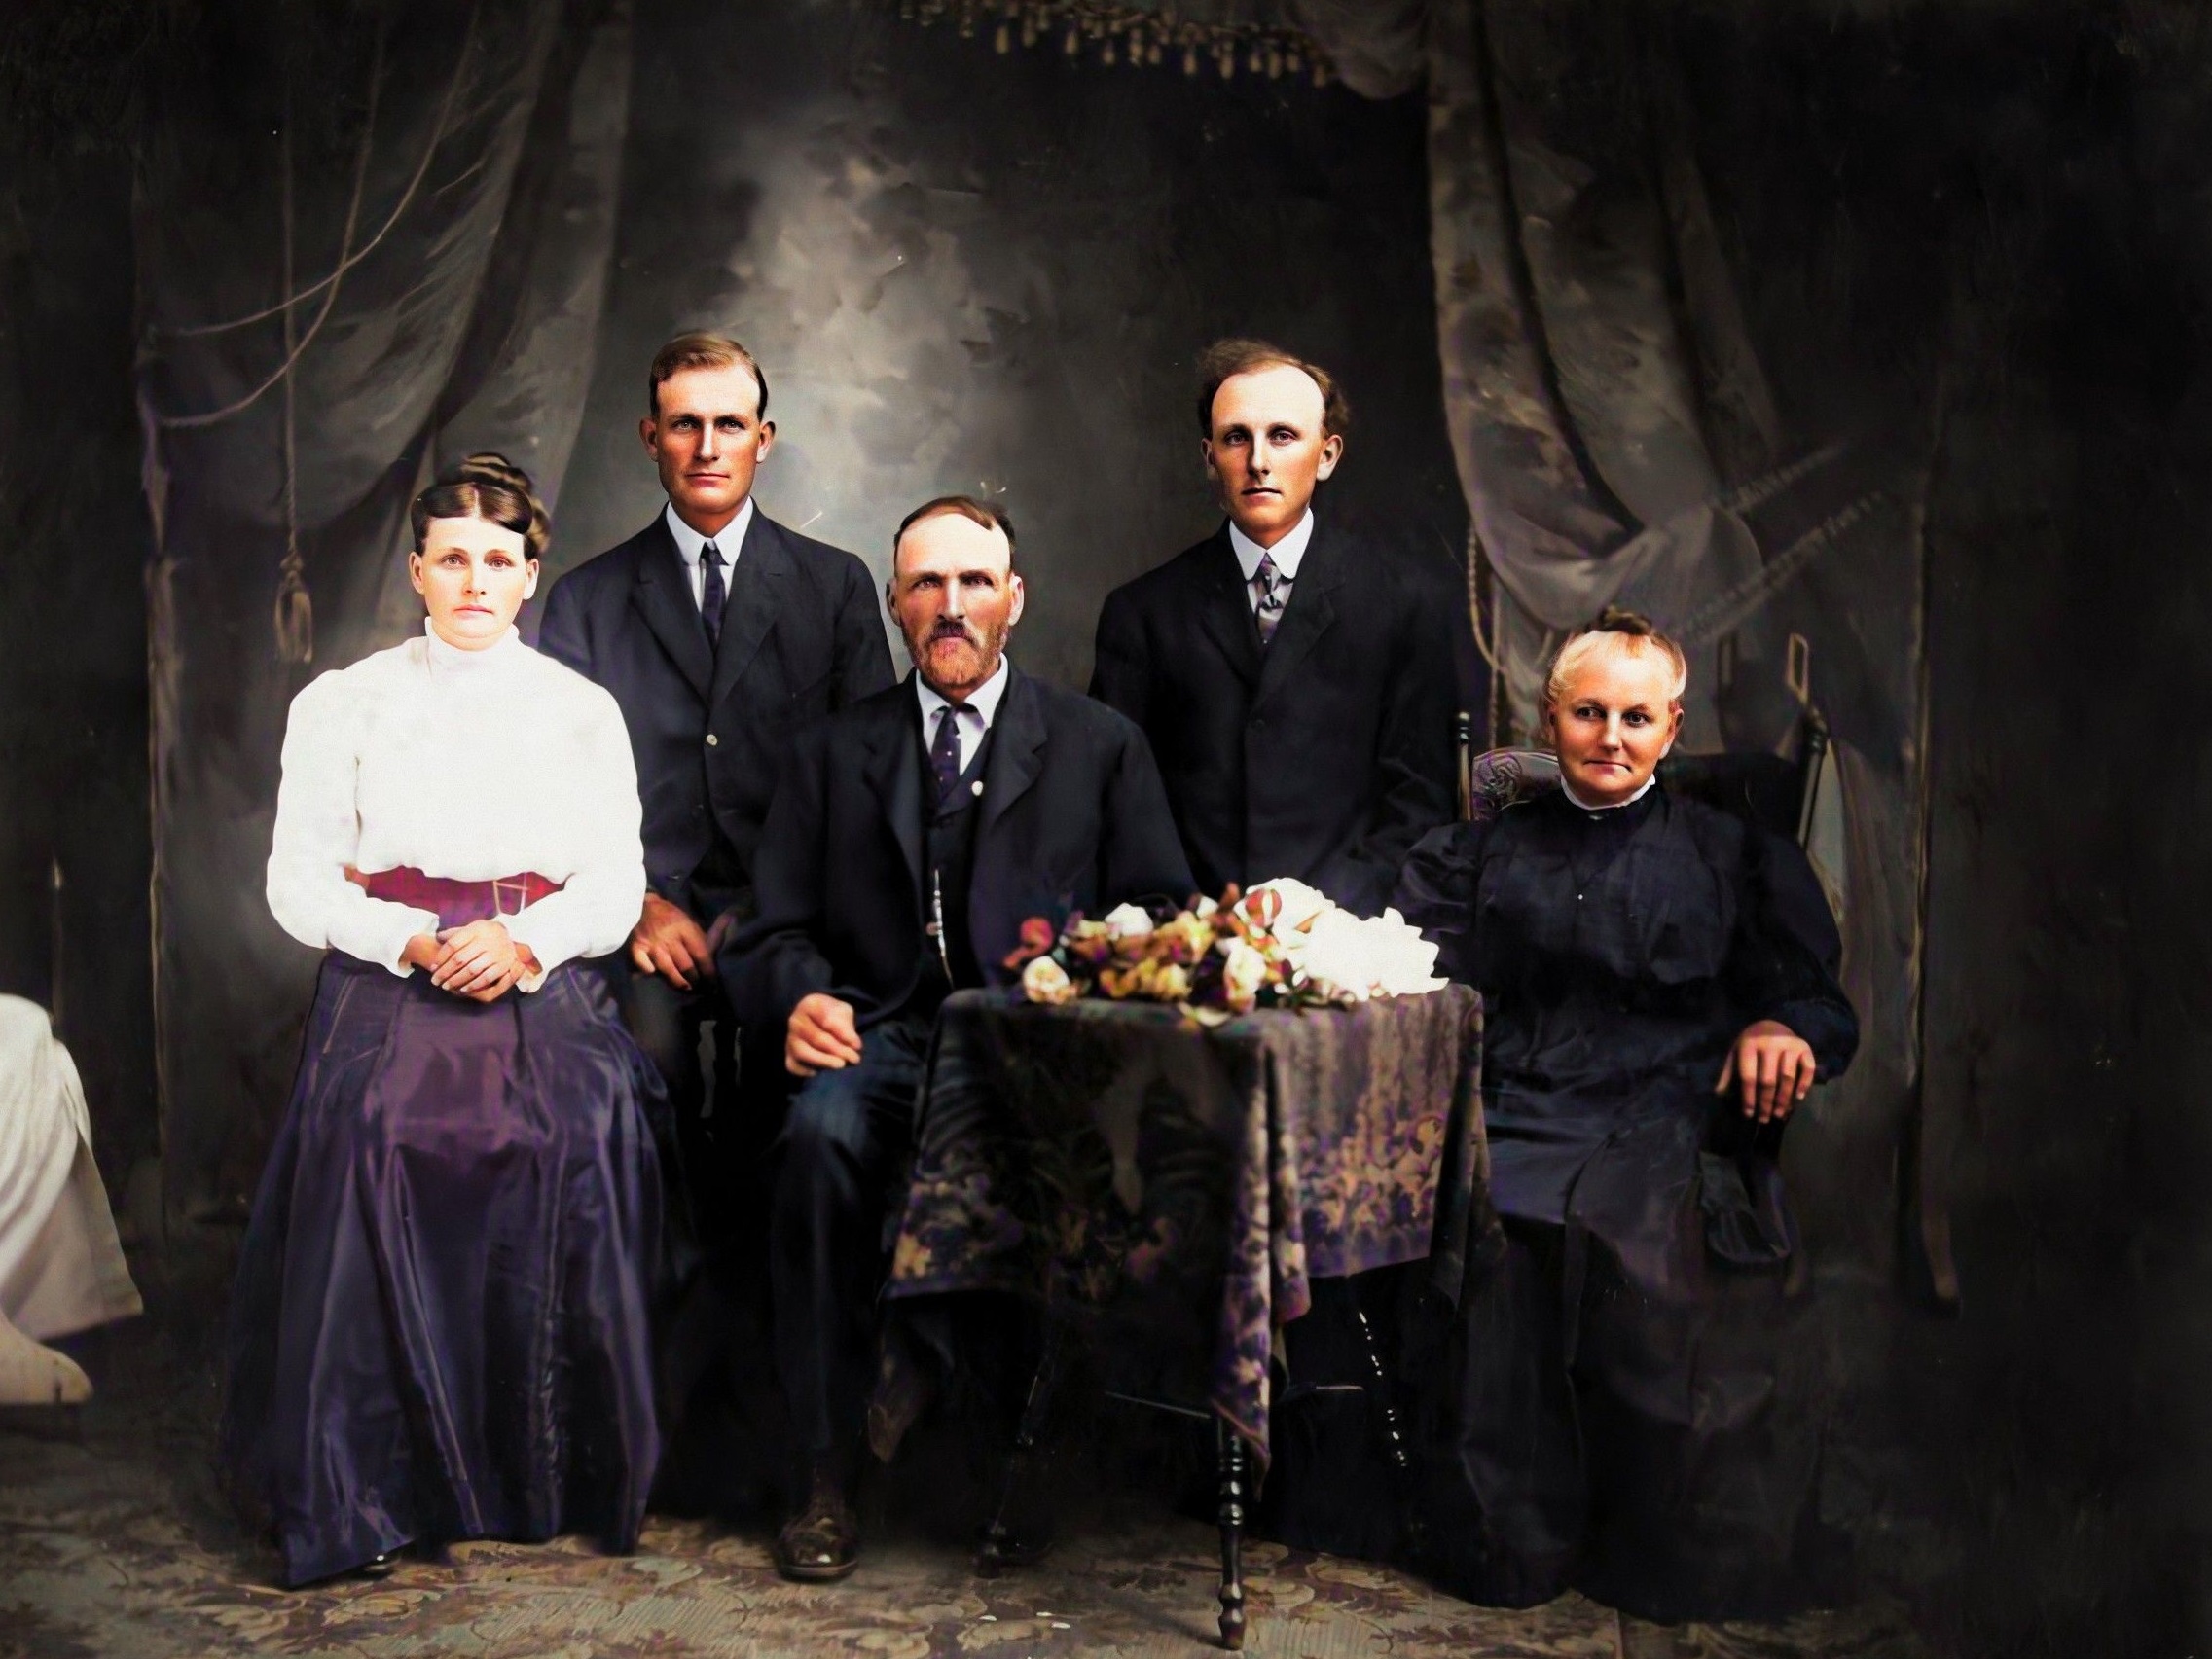 Musick (left) as a young woman, along with her two brothers and parents. (Source: The 110 Club)